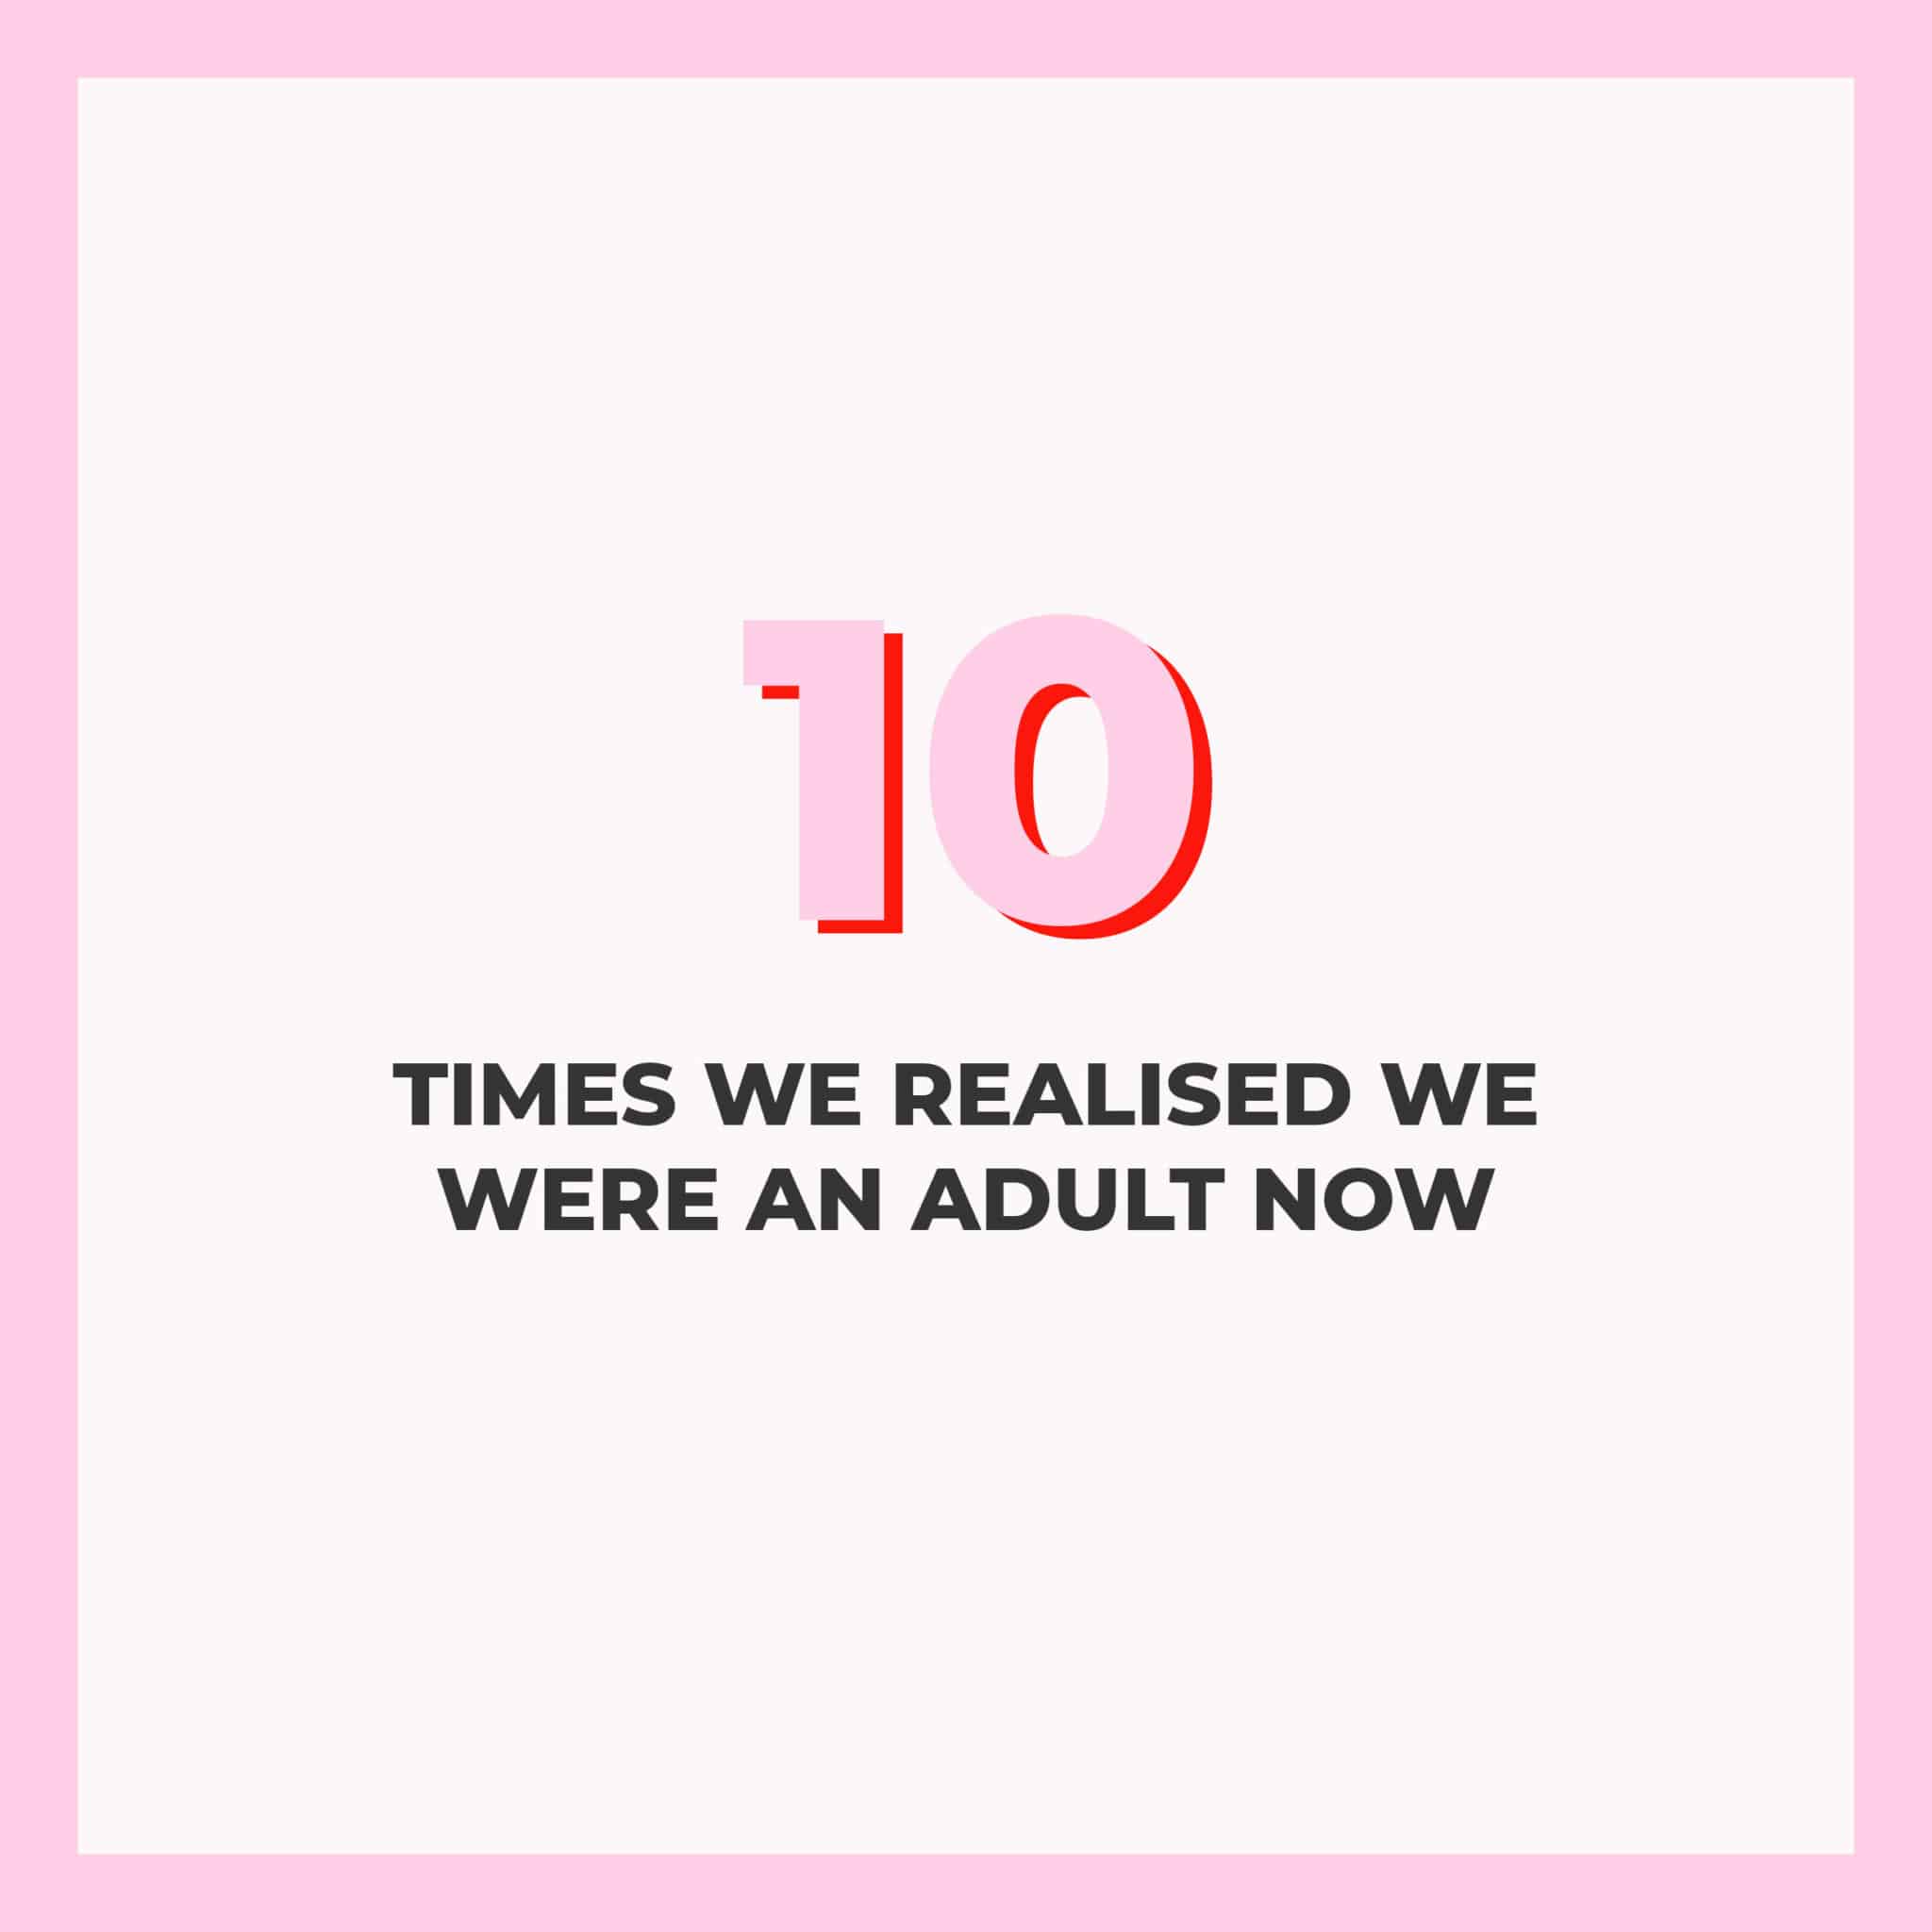 10 Times We Realised We Were an Adult Now